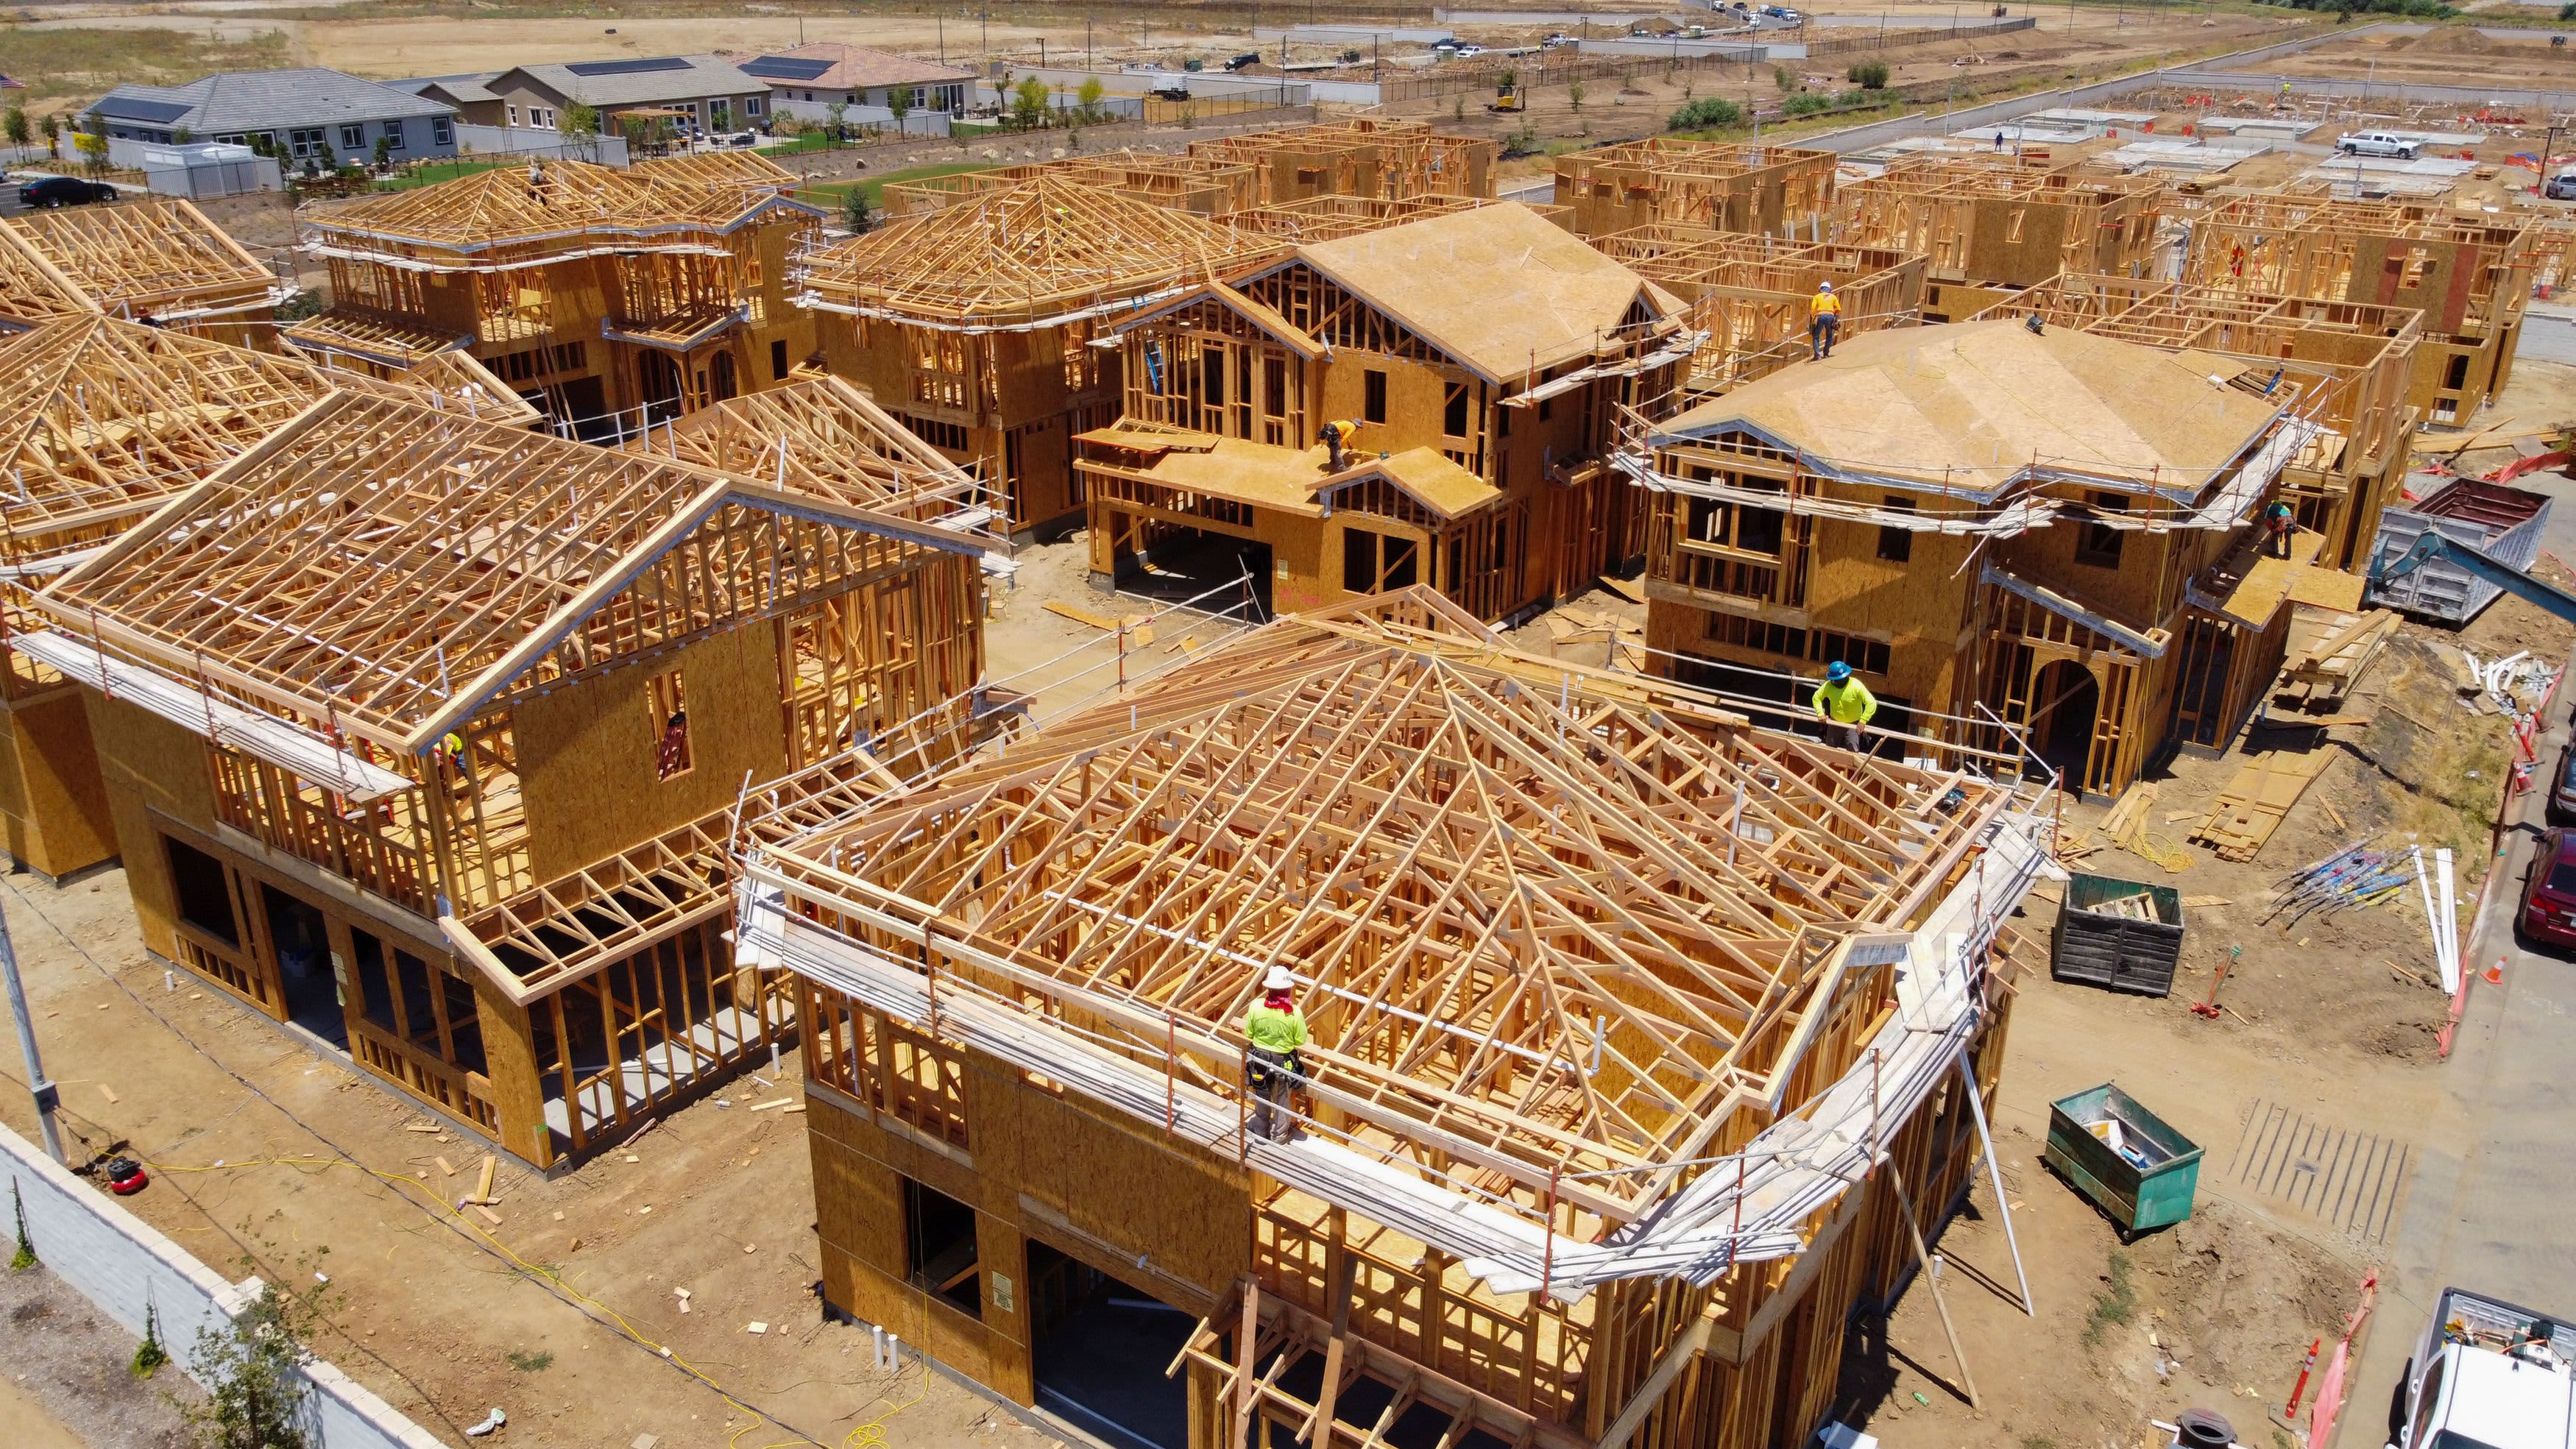 The Fed doesn’t need to worry about the hot housing market right now, Jim Cramer says